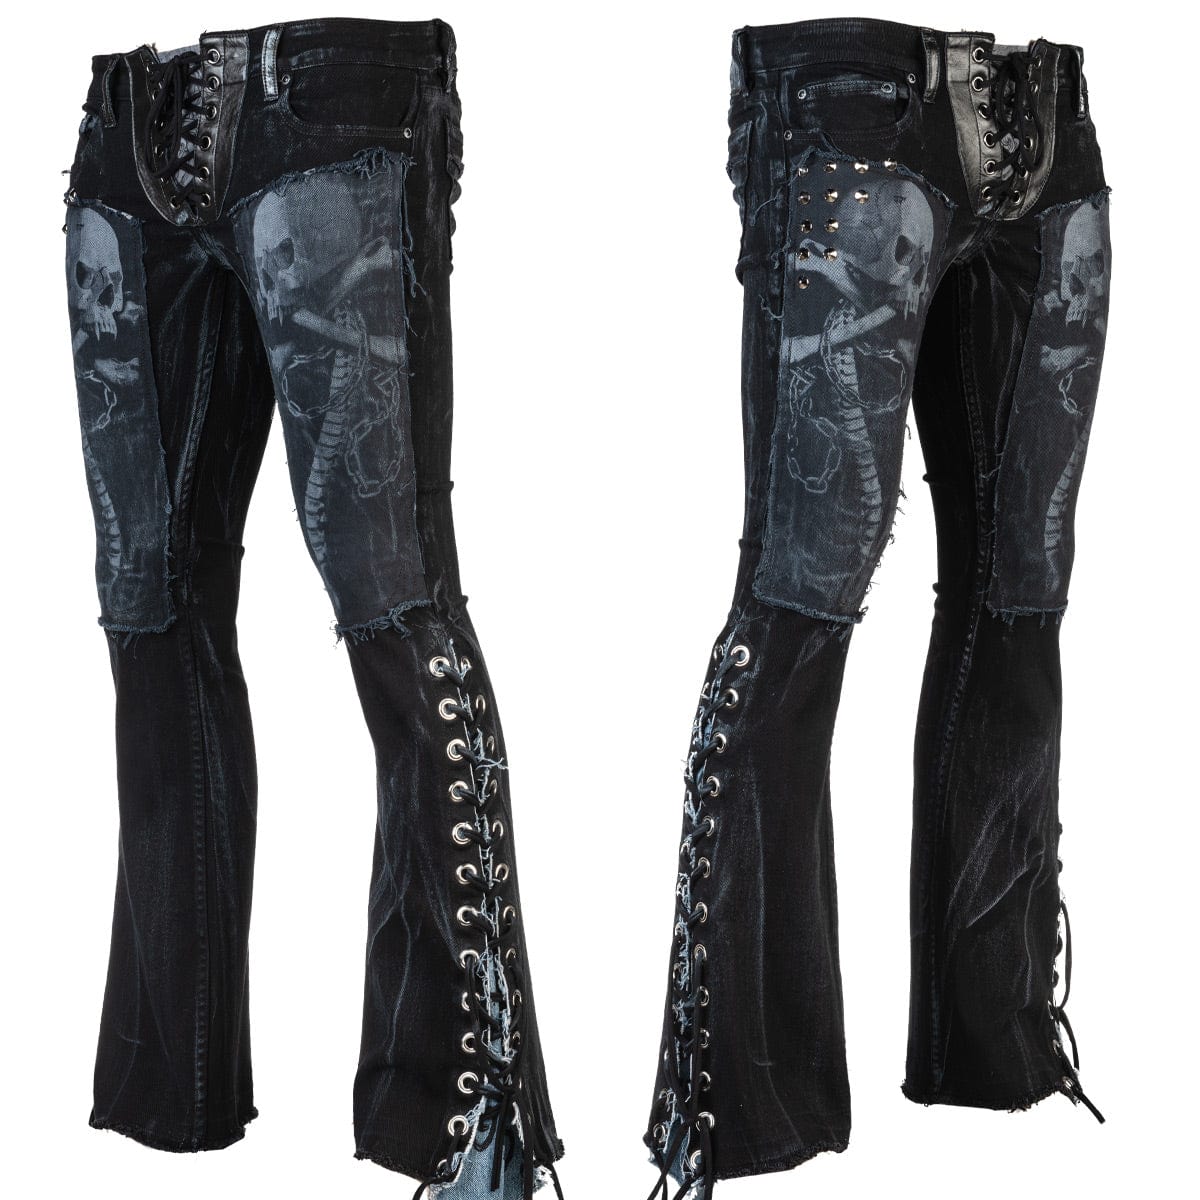 Custom Chop Shop Pants WORNSTAR CUSTOM JEANS - SKULL SPINES with lace-up fly